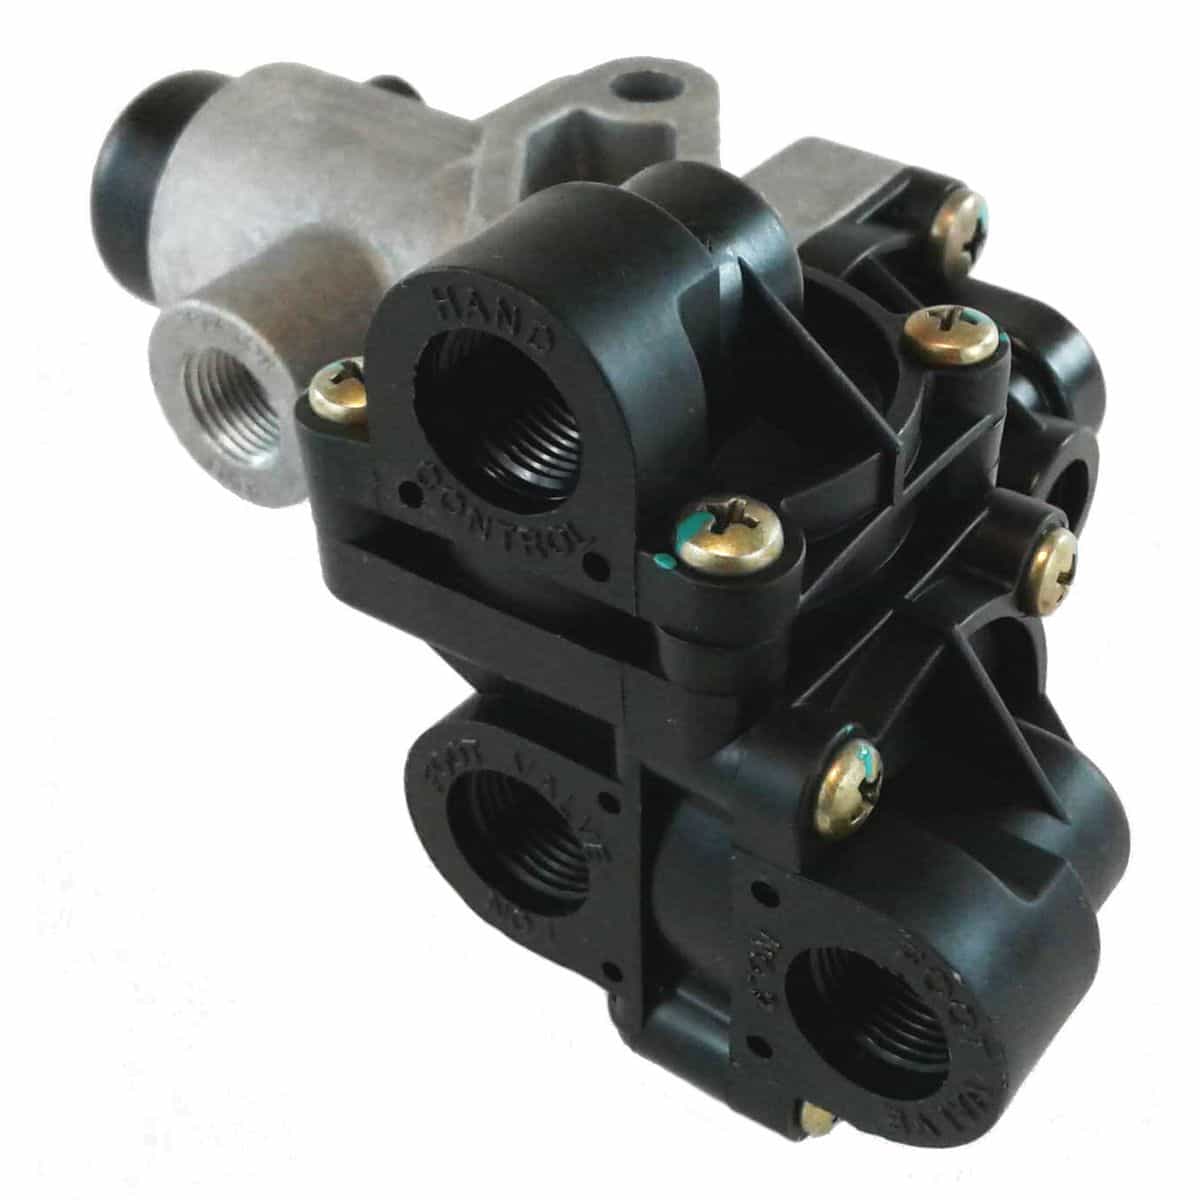 All-in-One Tractor Protection Two-Line Manifold Style Air Brake Valve